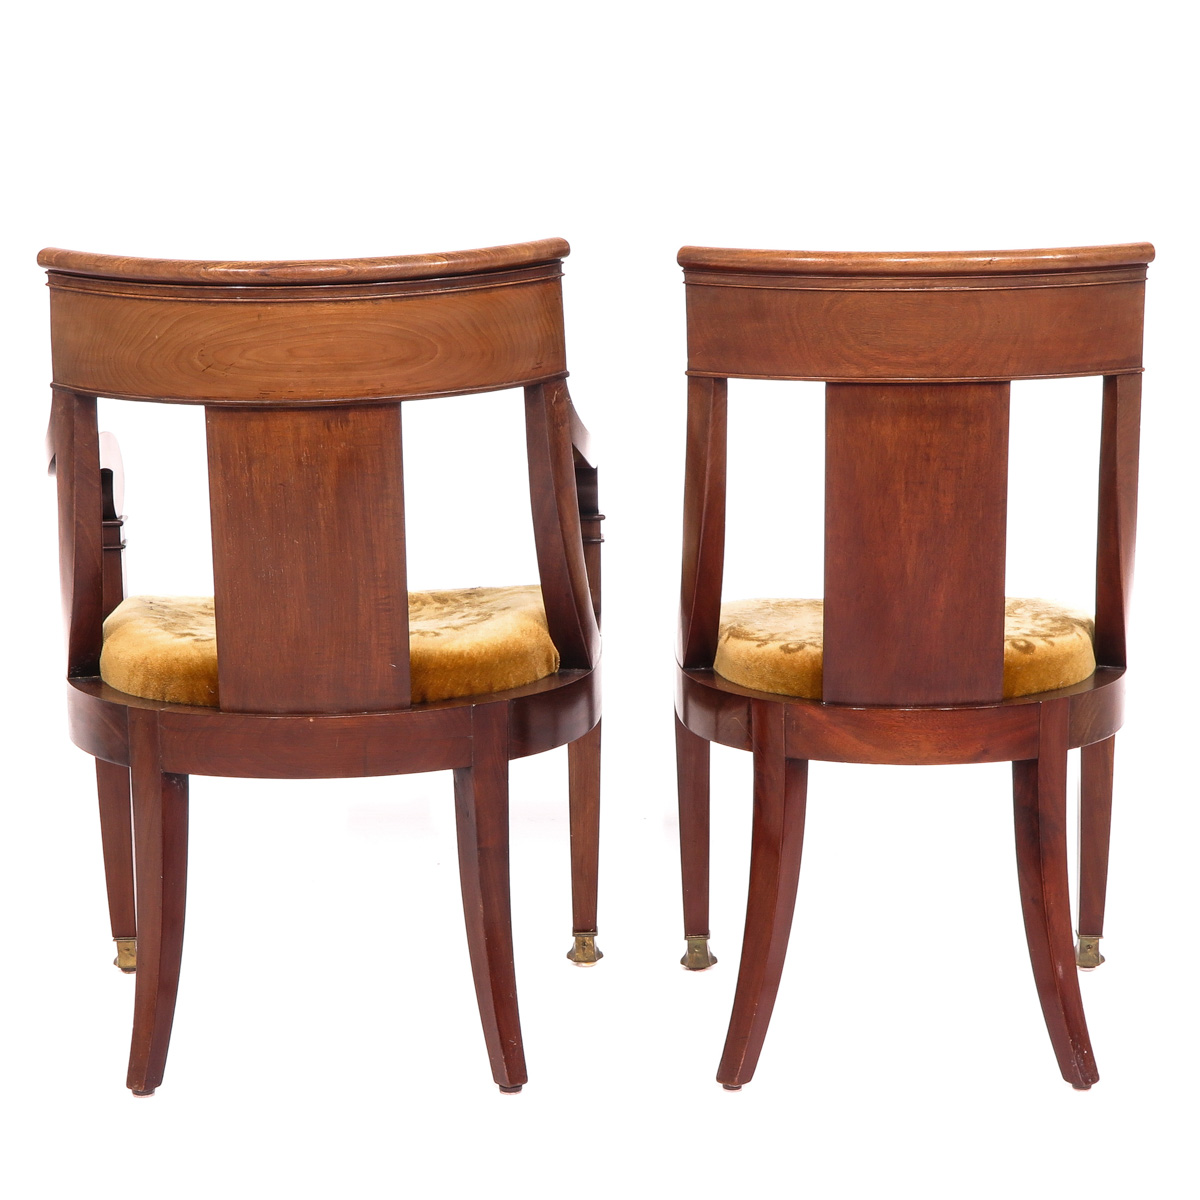 A Pair of Empire Period Chairs - Image 3 of 10